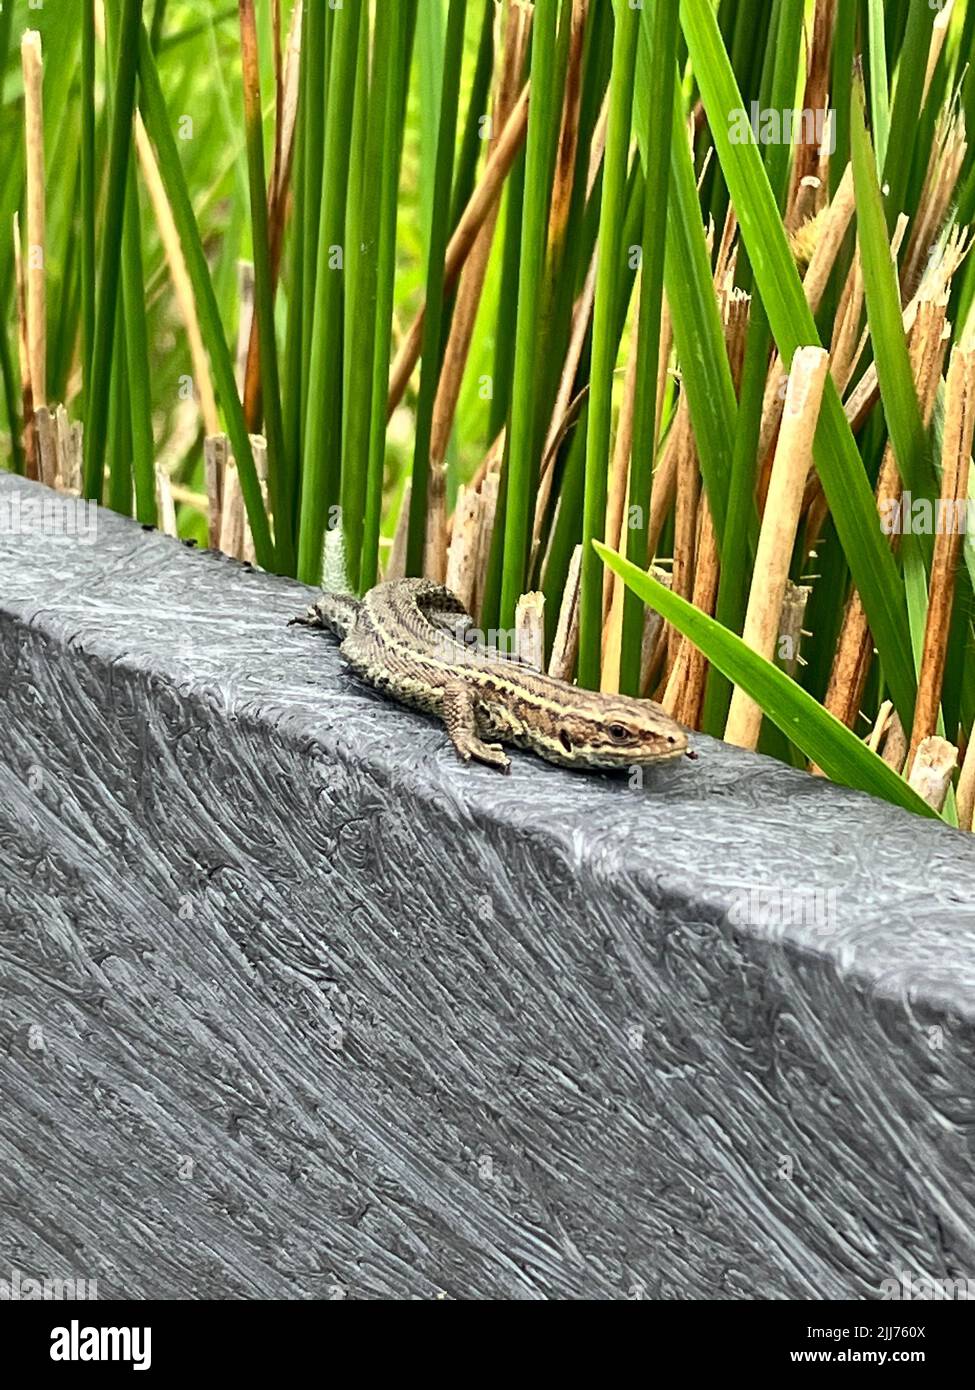 A lizard on a stone outdoors Stock Photo